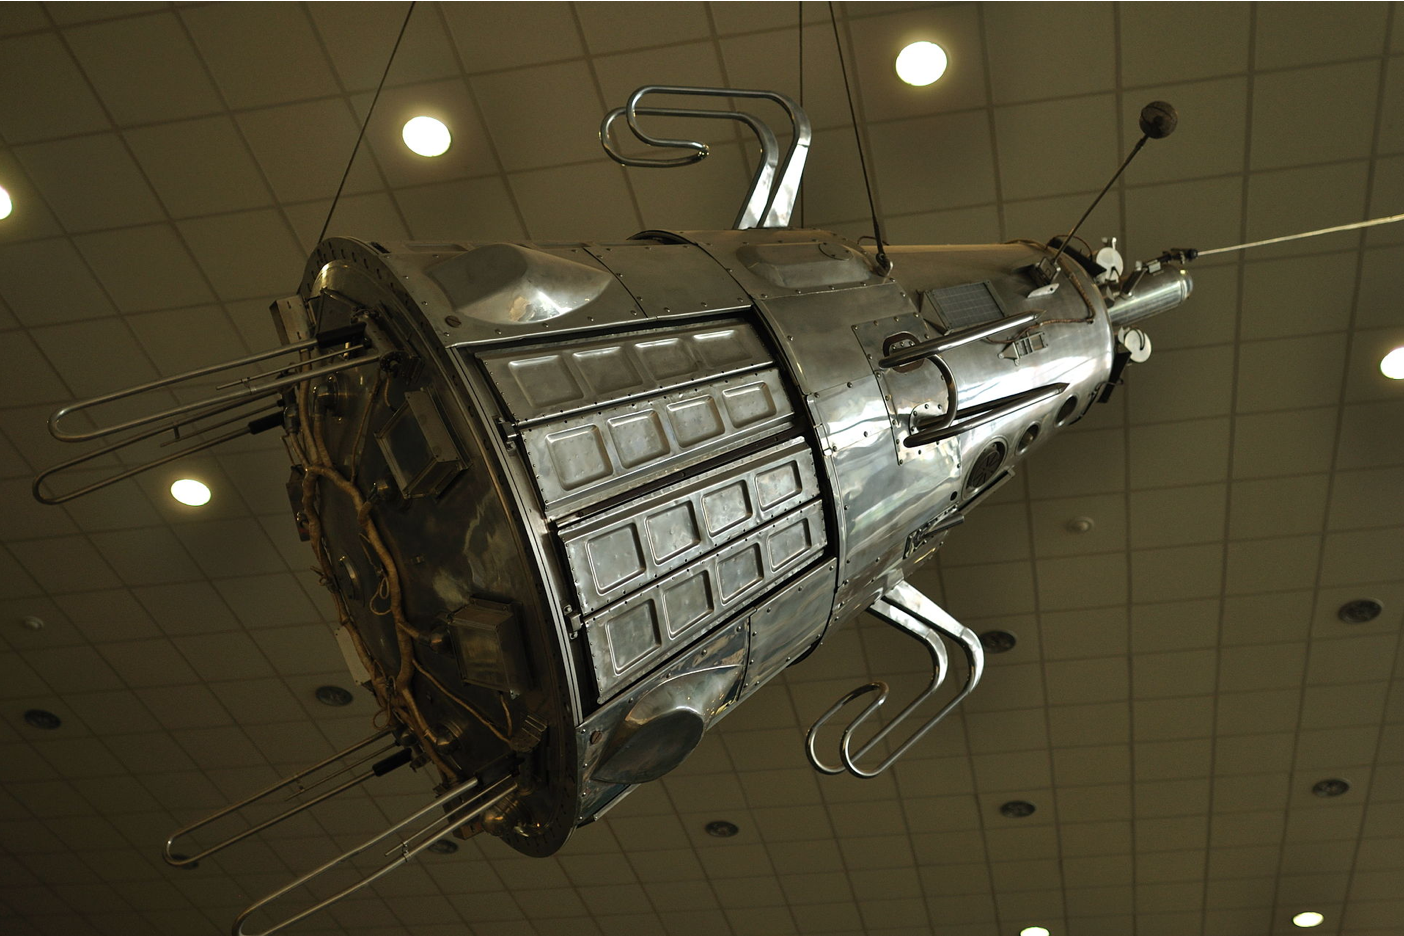 Model of Sputnik 3 on display at the Konstantin E. Tsiolkovsky State Museum of the History of Cosmonautics in Kaluga, Russia. I